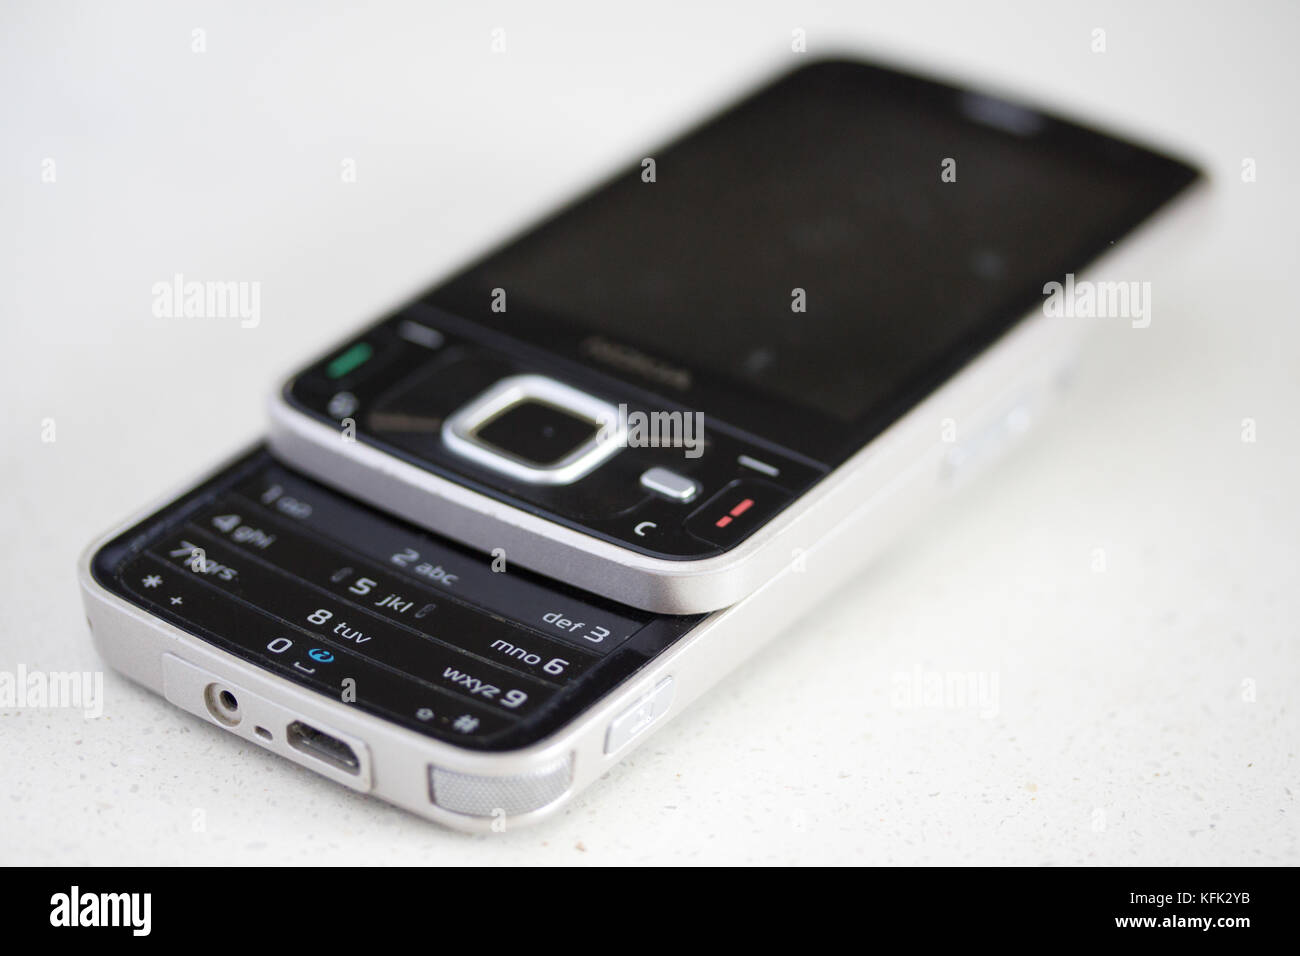 An old style Nokia N96 mobile phone. Stock Photo